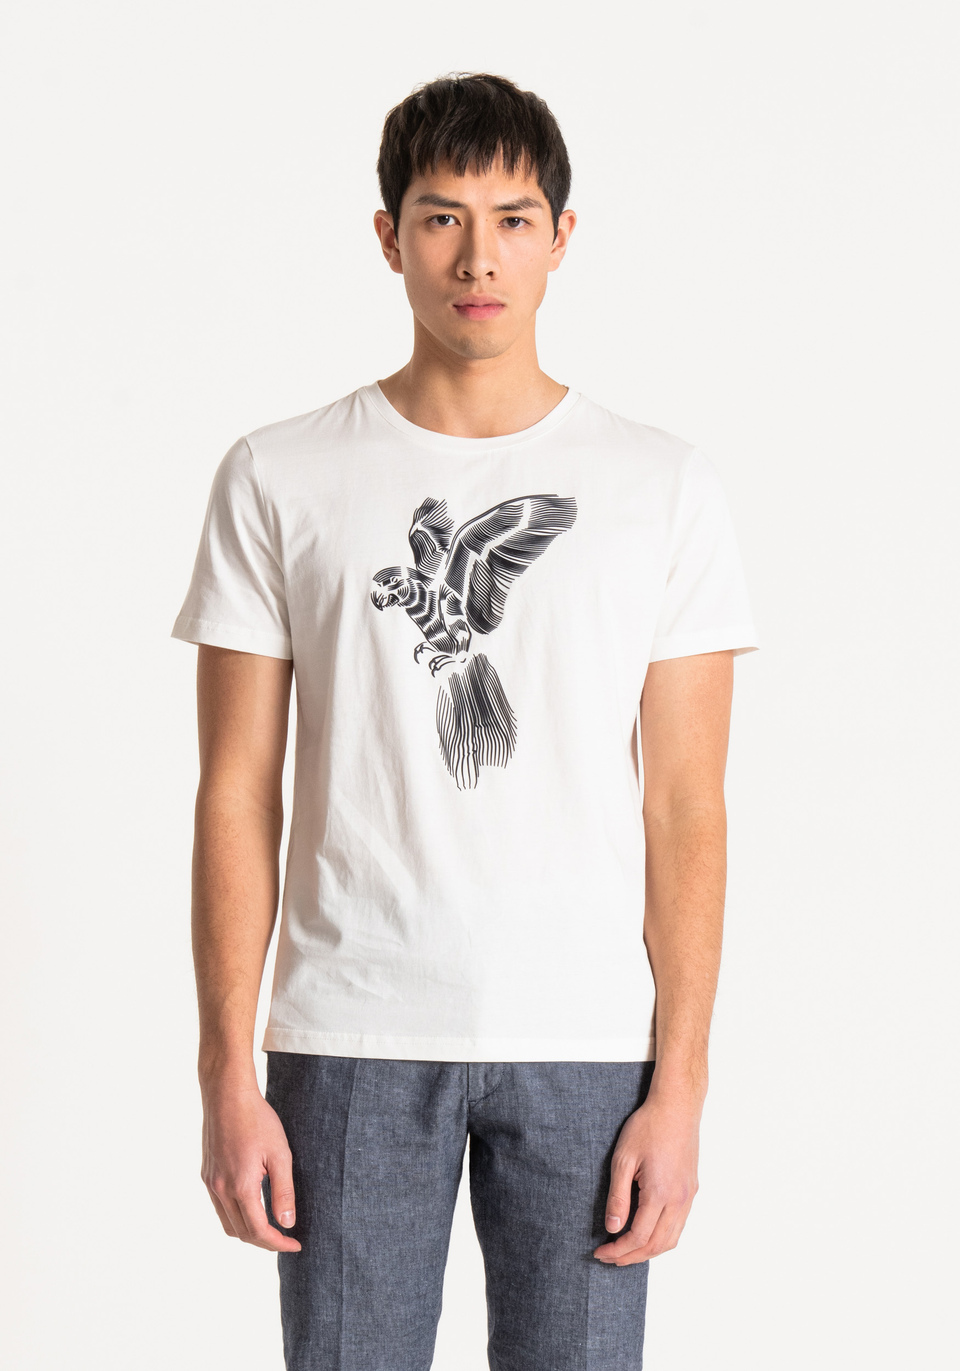 SLIM-FIT T-SHIRT IN 100% COTTON WITH A PARROT PRINT - Antony Morato Online Shop